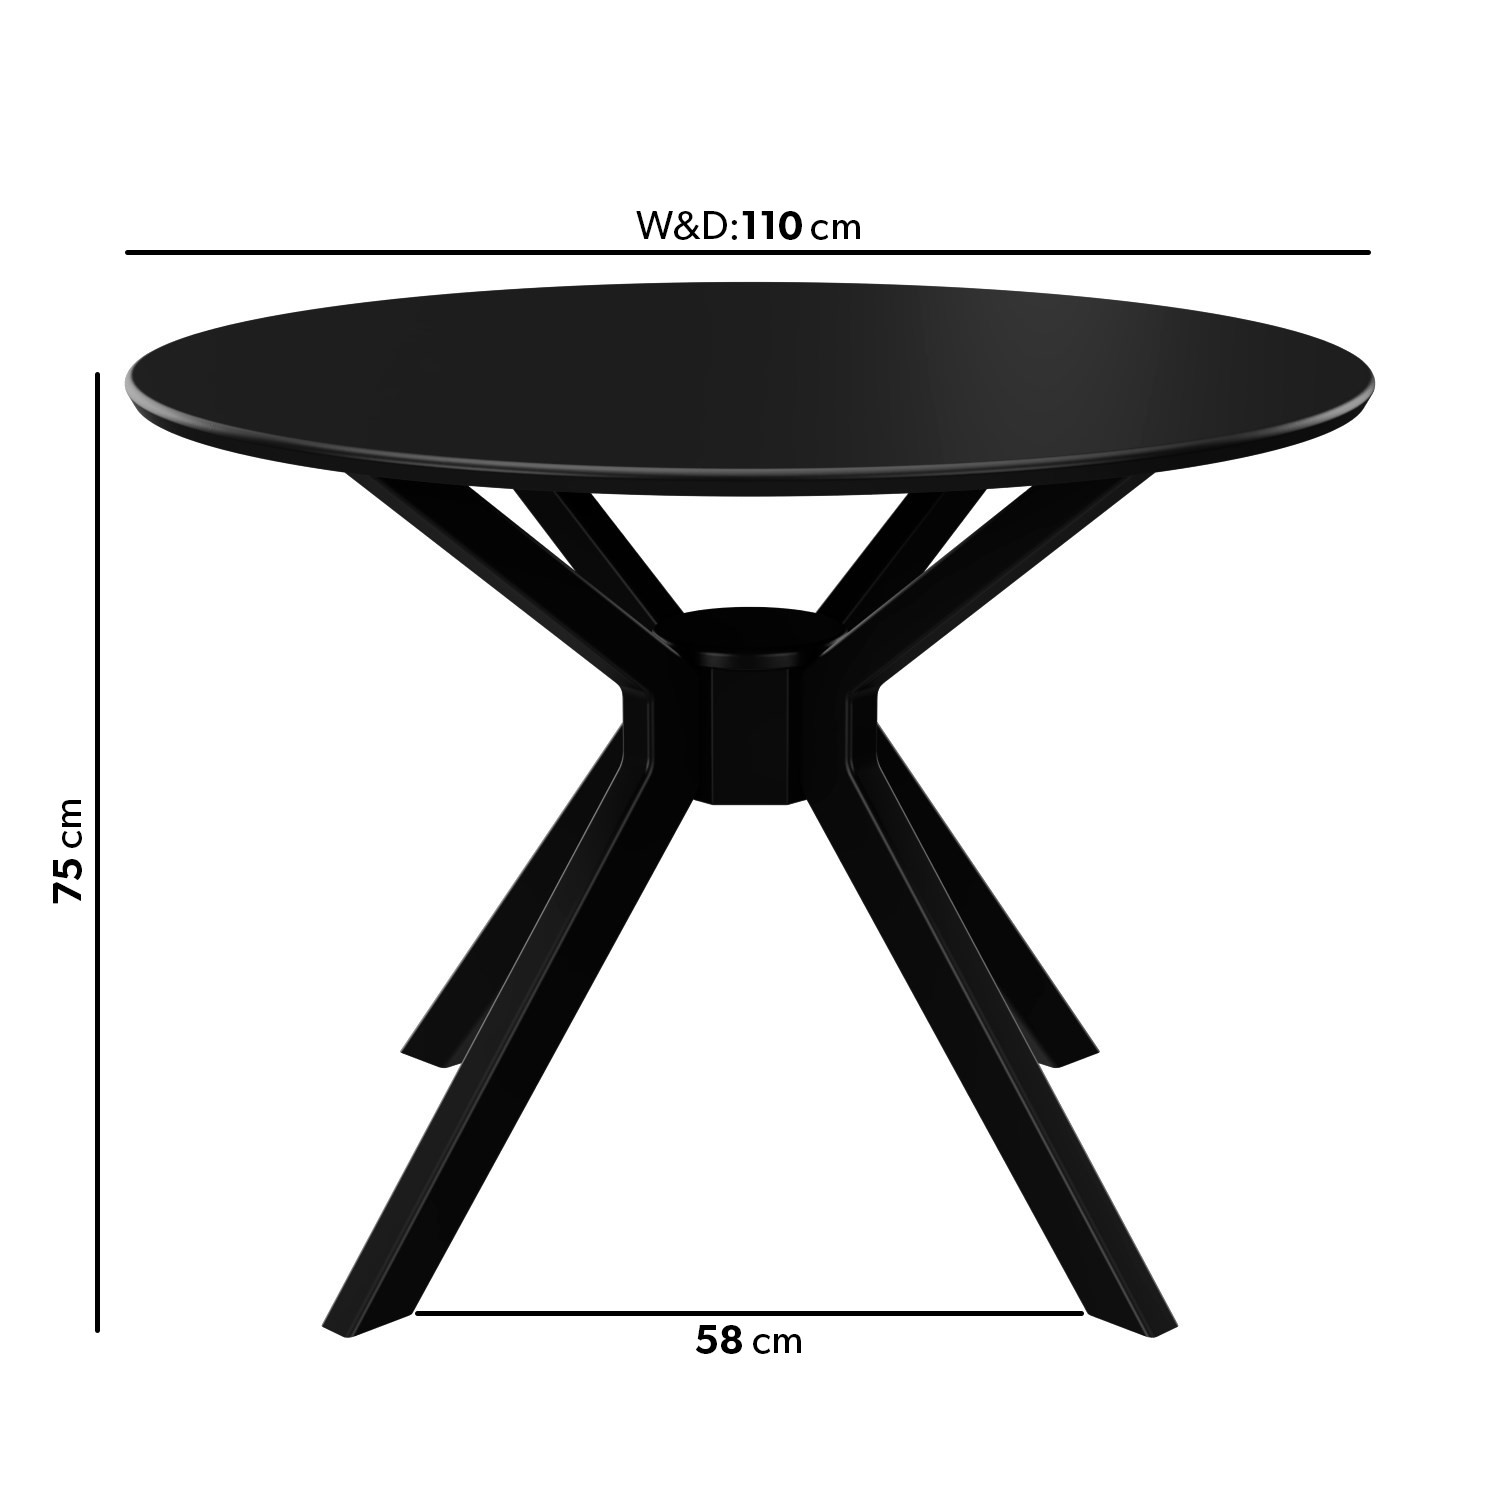 Read more about Small round black dining table seats 4 karie